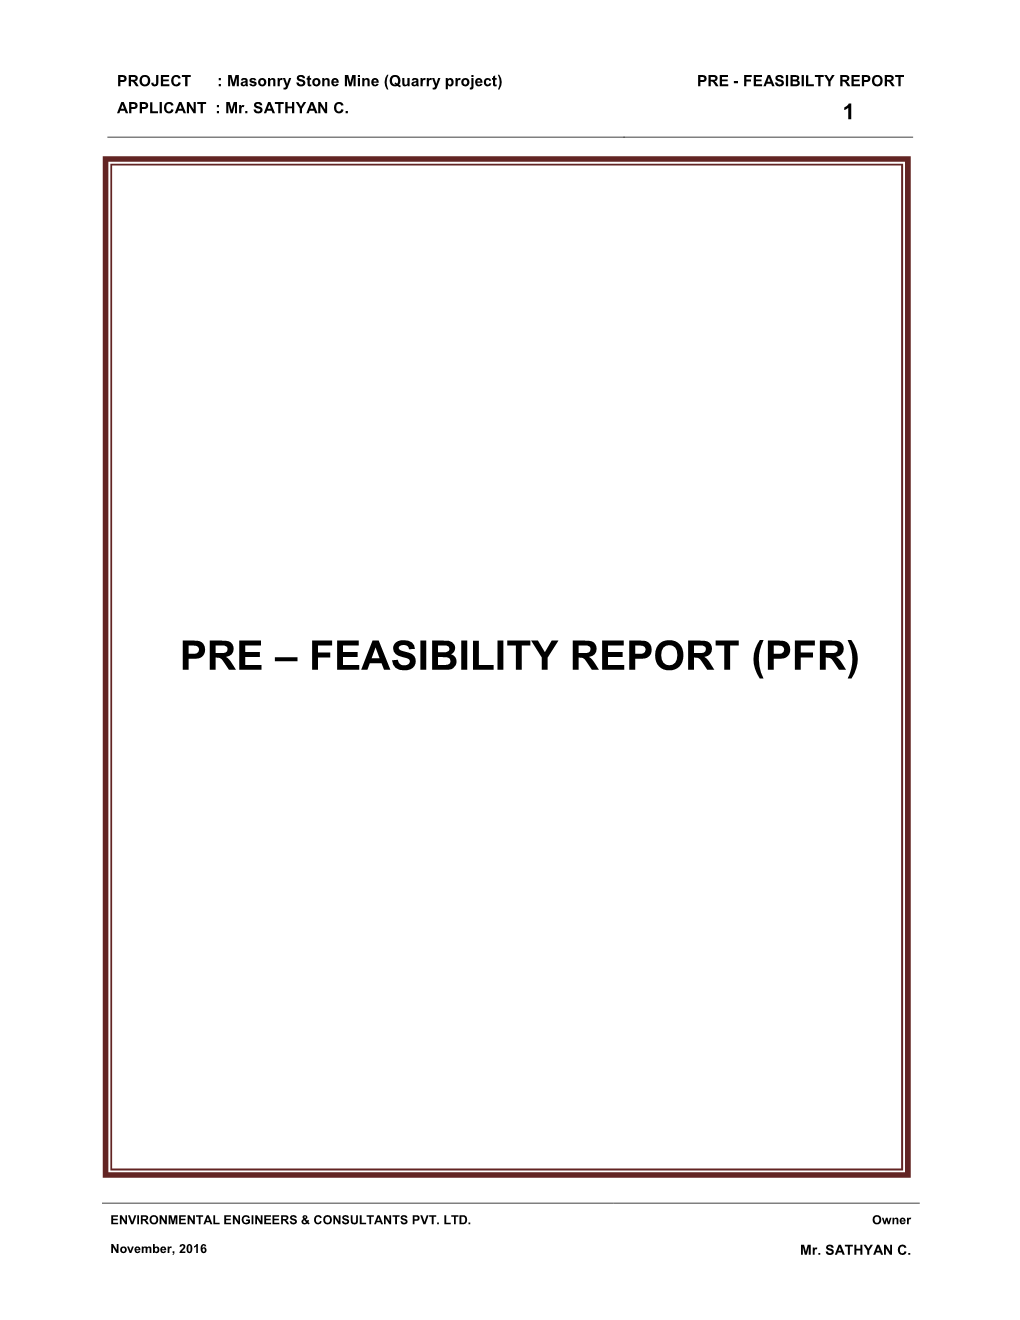 Feasibility Report (Pfr)